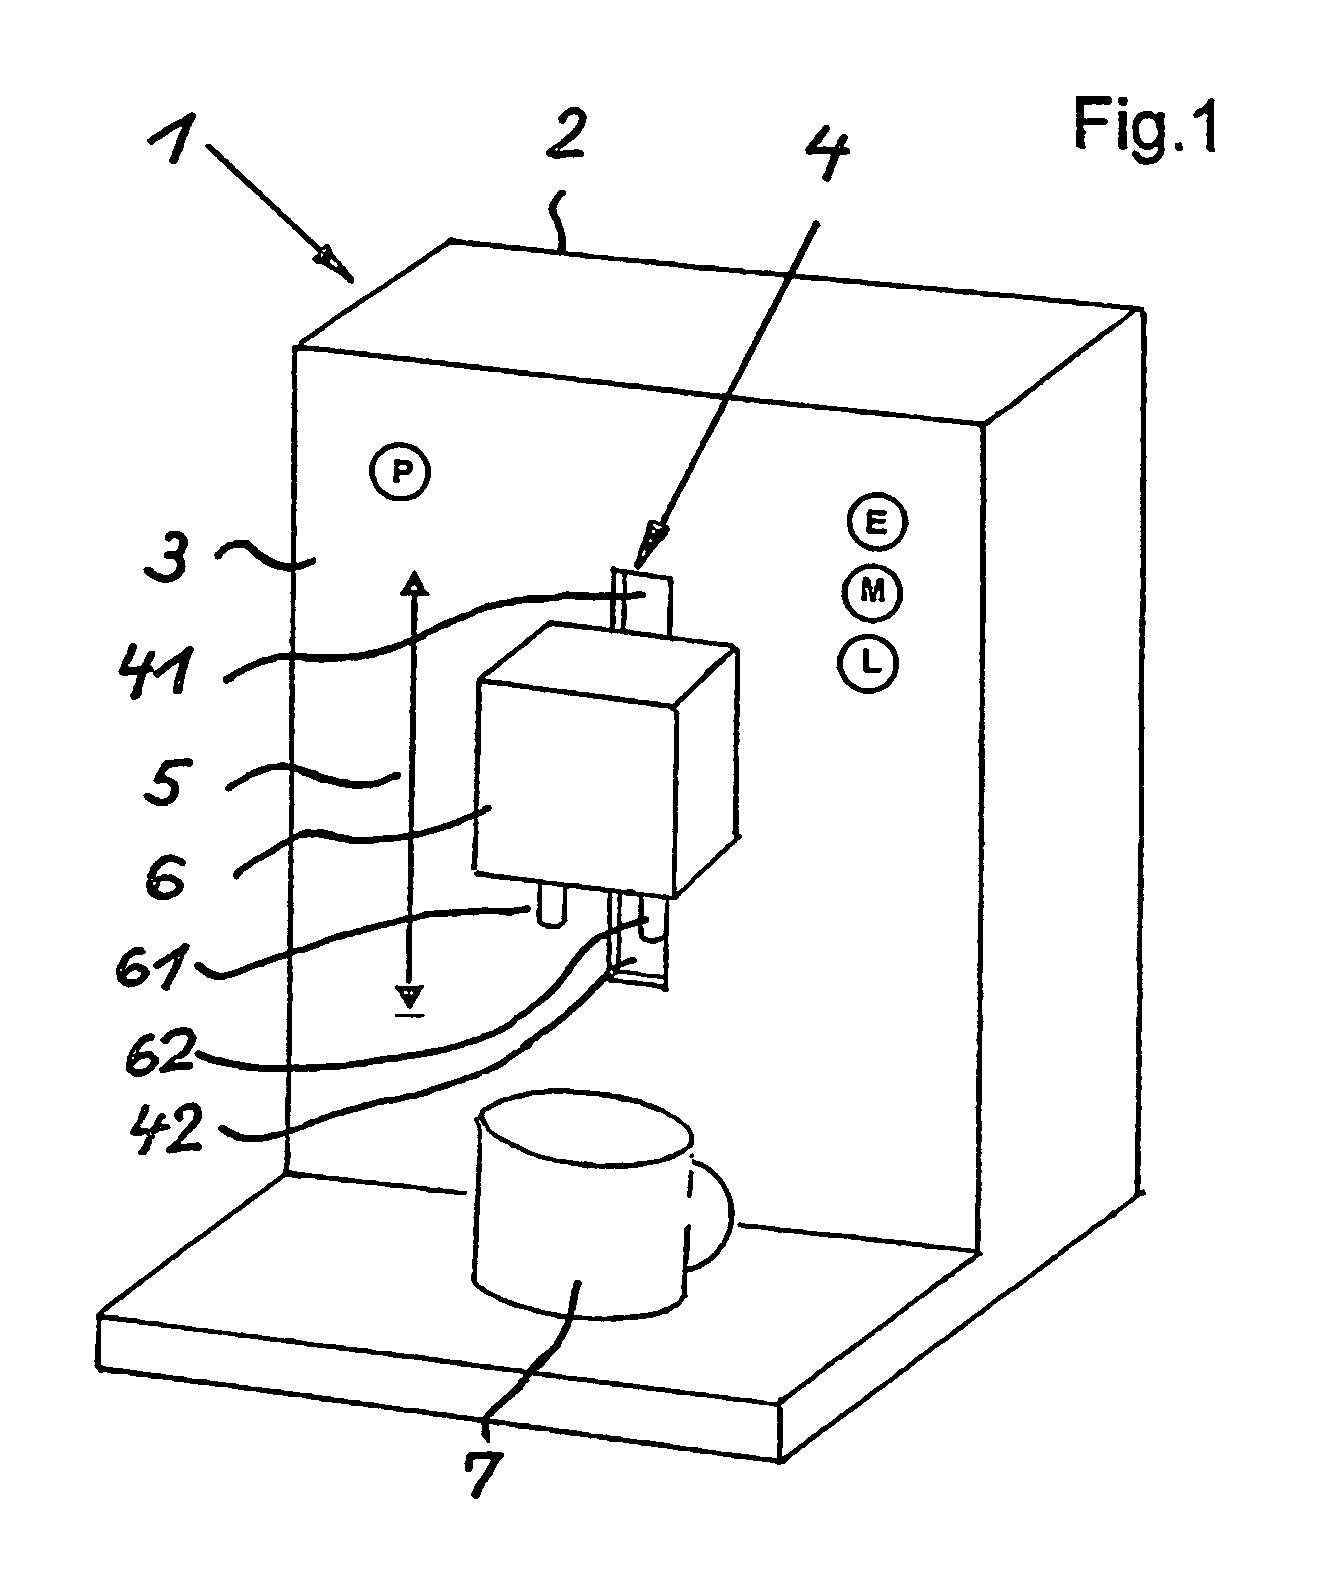 Drink preparation machine, particularly espresso machine, comprising a height adjustable drink outflow unit